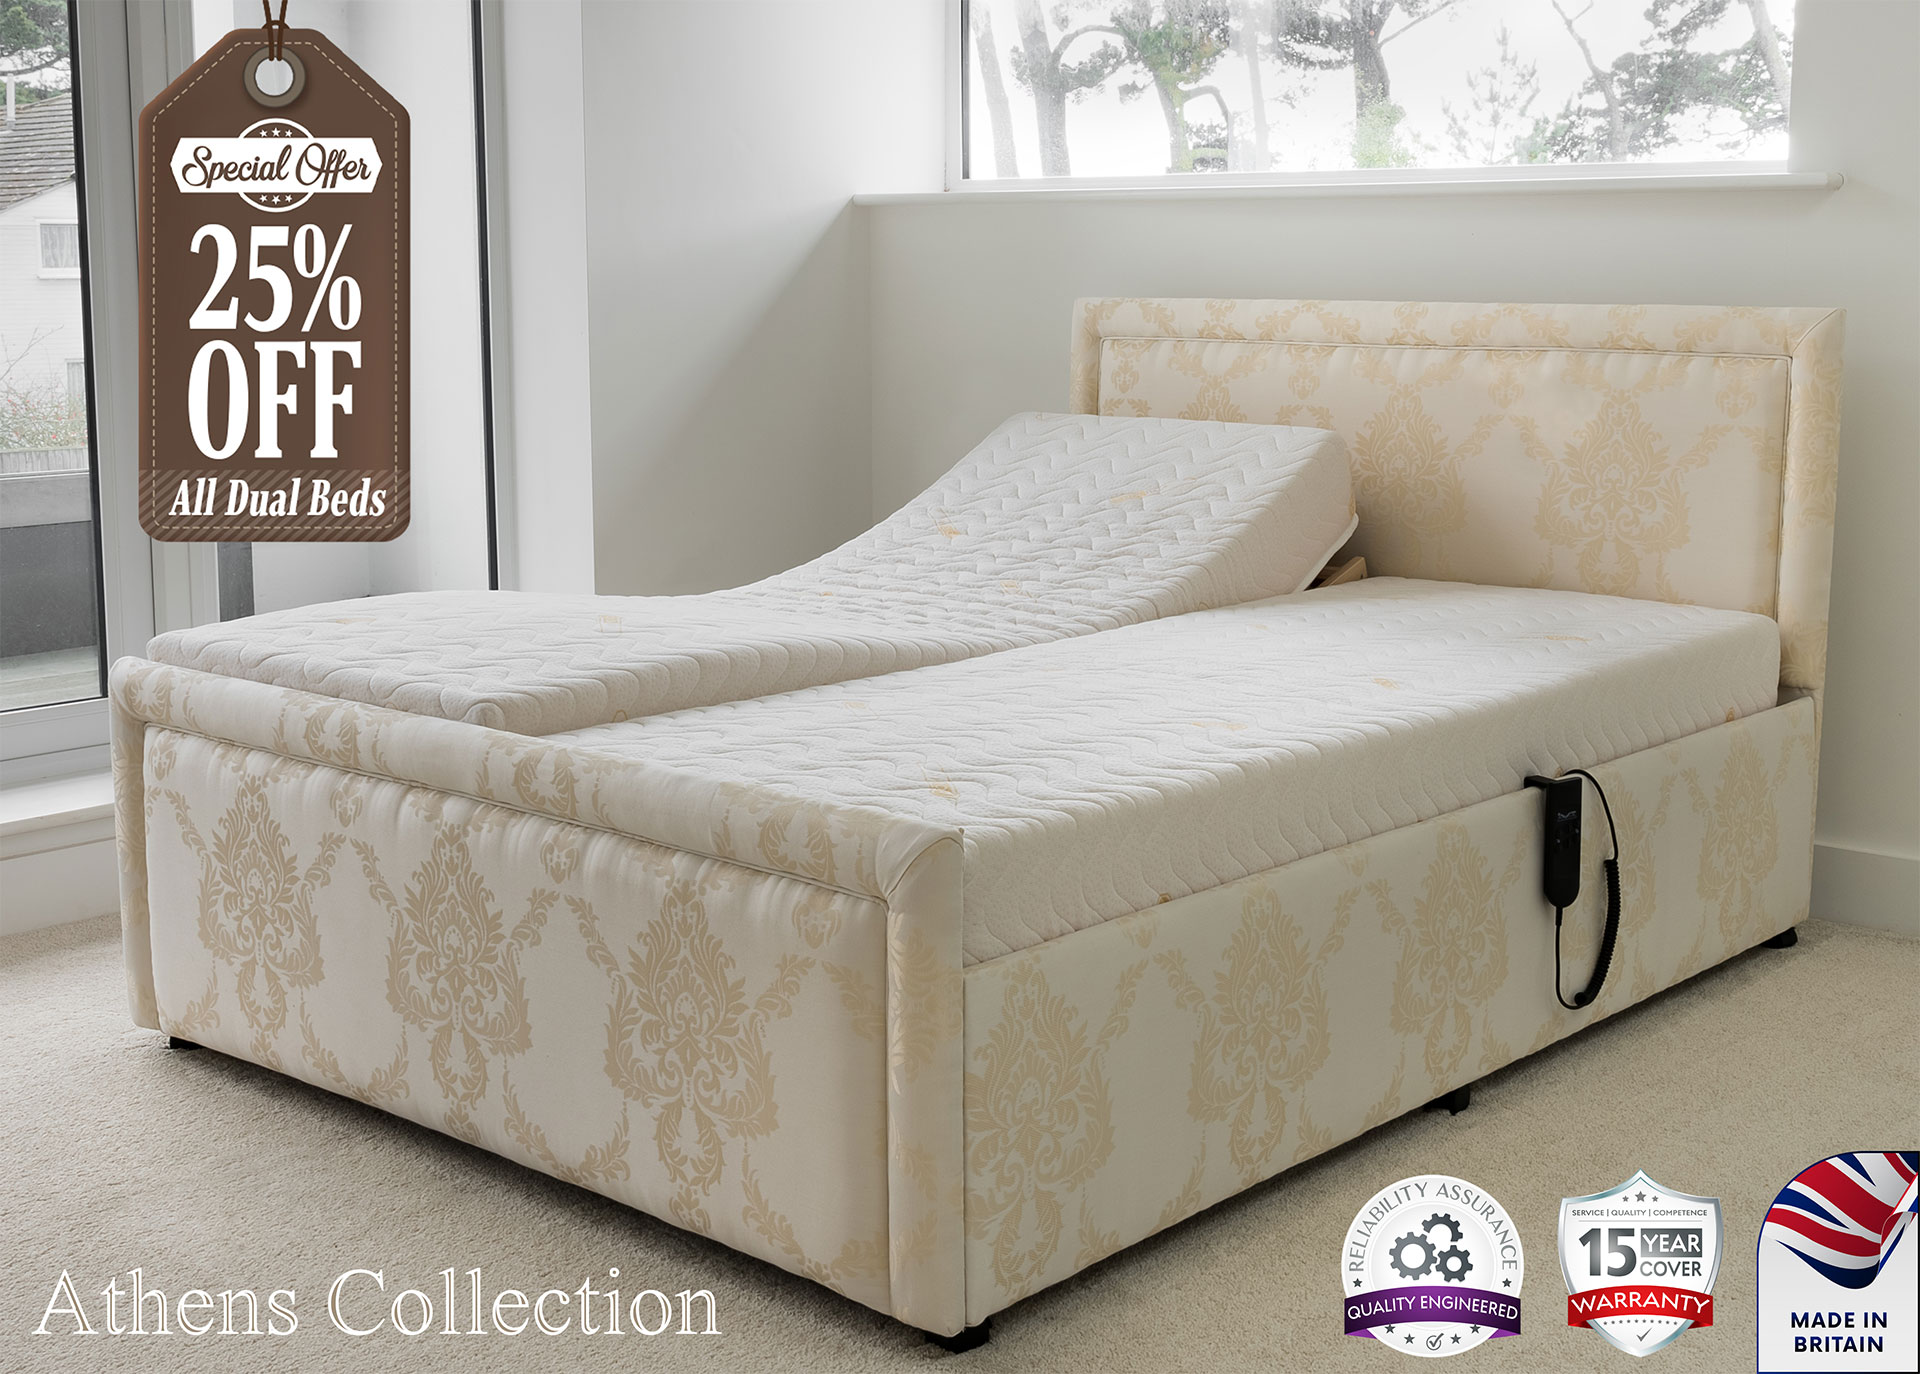 Athena Mobility | Athens Bed Collection